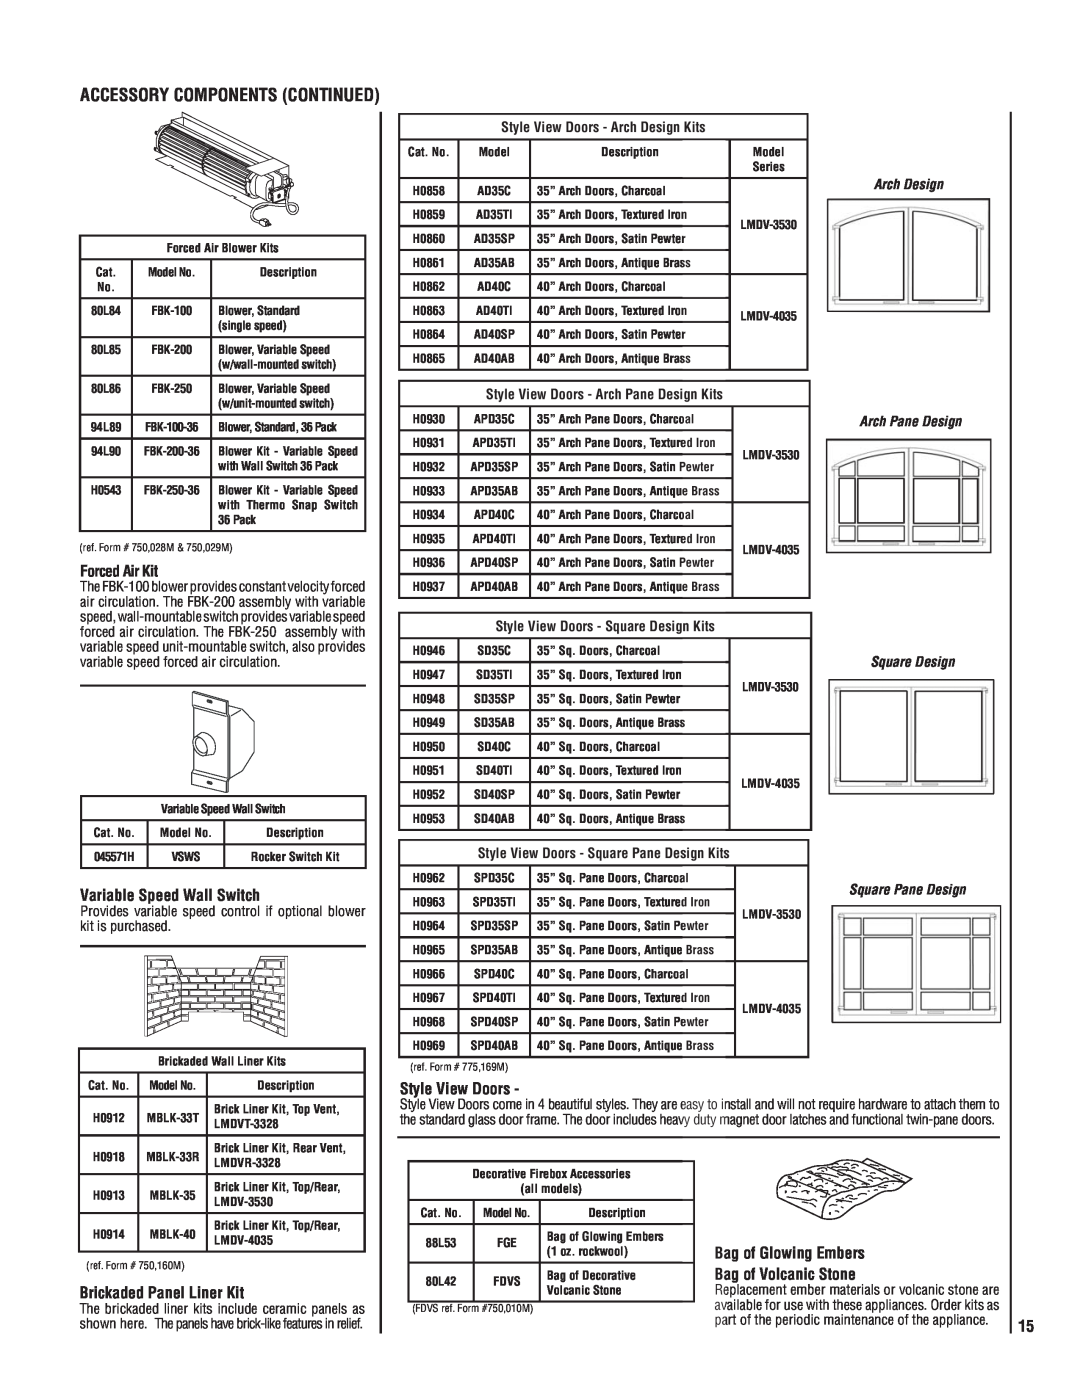 Maytag LMDV-40 SERIES manual Accessory Components Continued, Forced Air Kit, Variable Speed Wall Switch, Style View Doors 